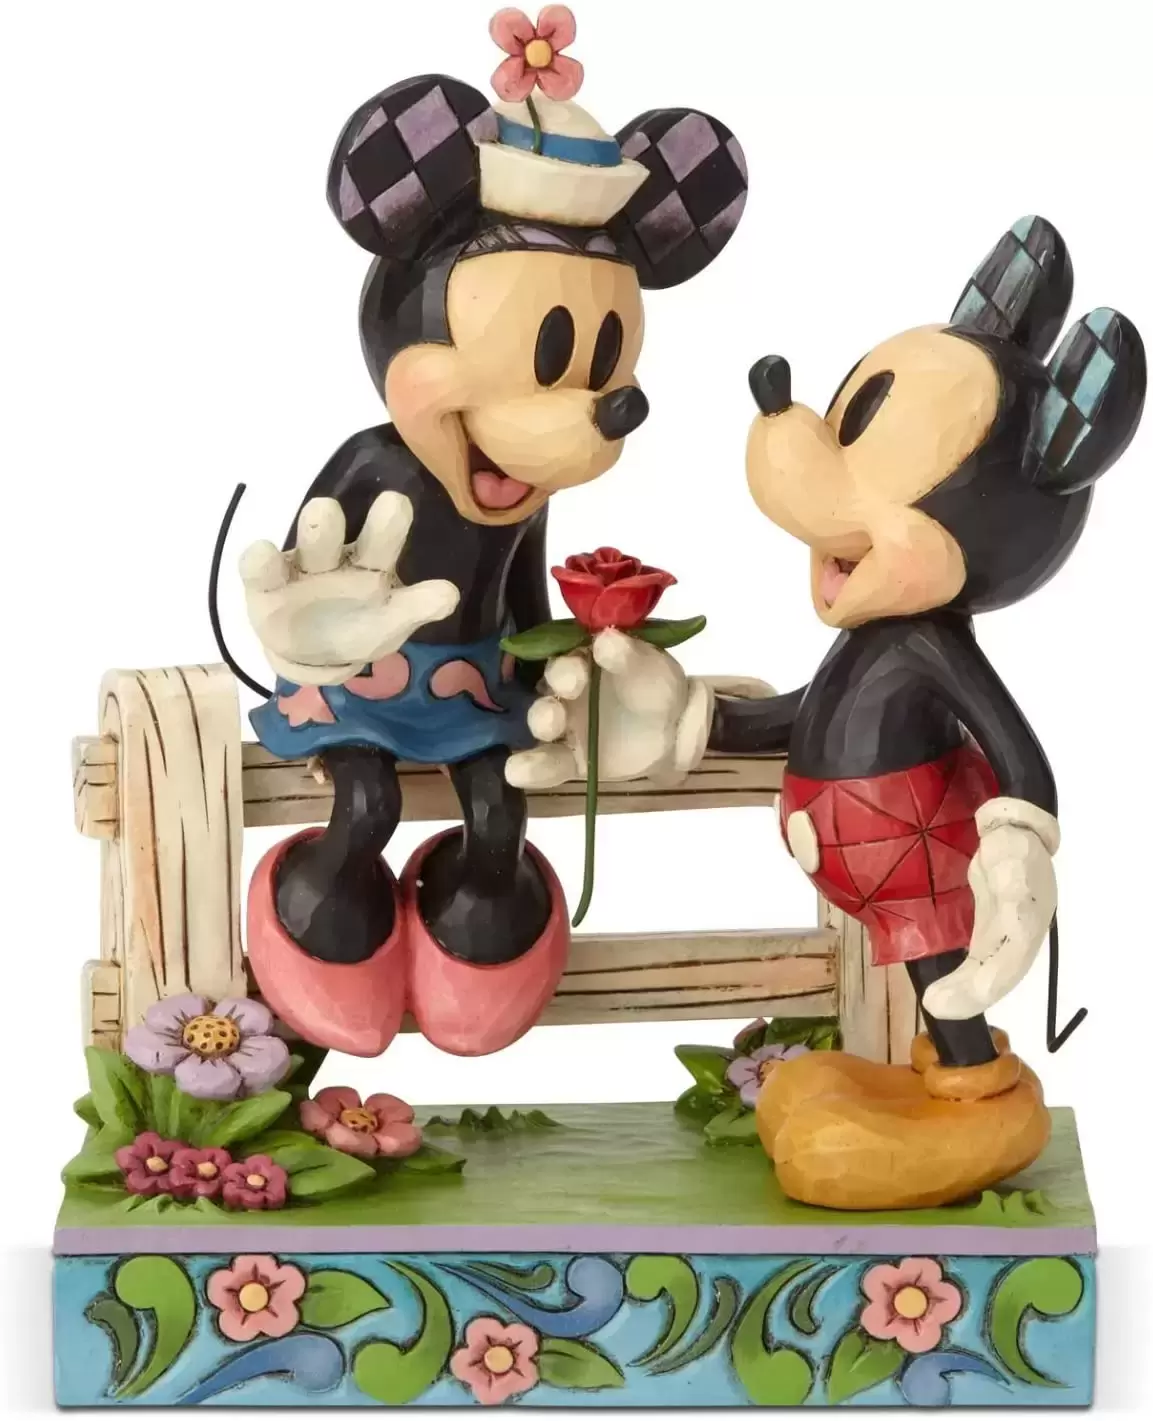 Disney Traditions by Jim Shore - Blossoming Romance